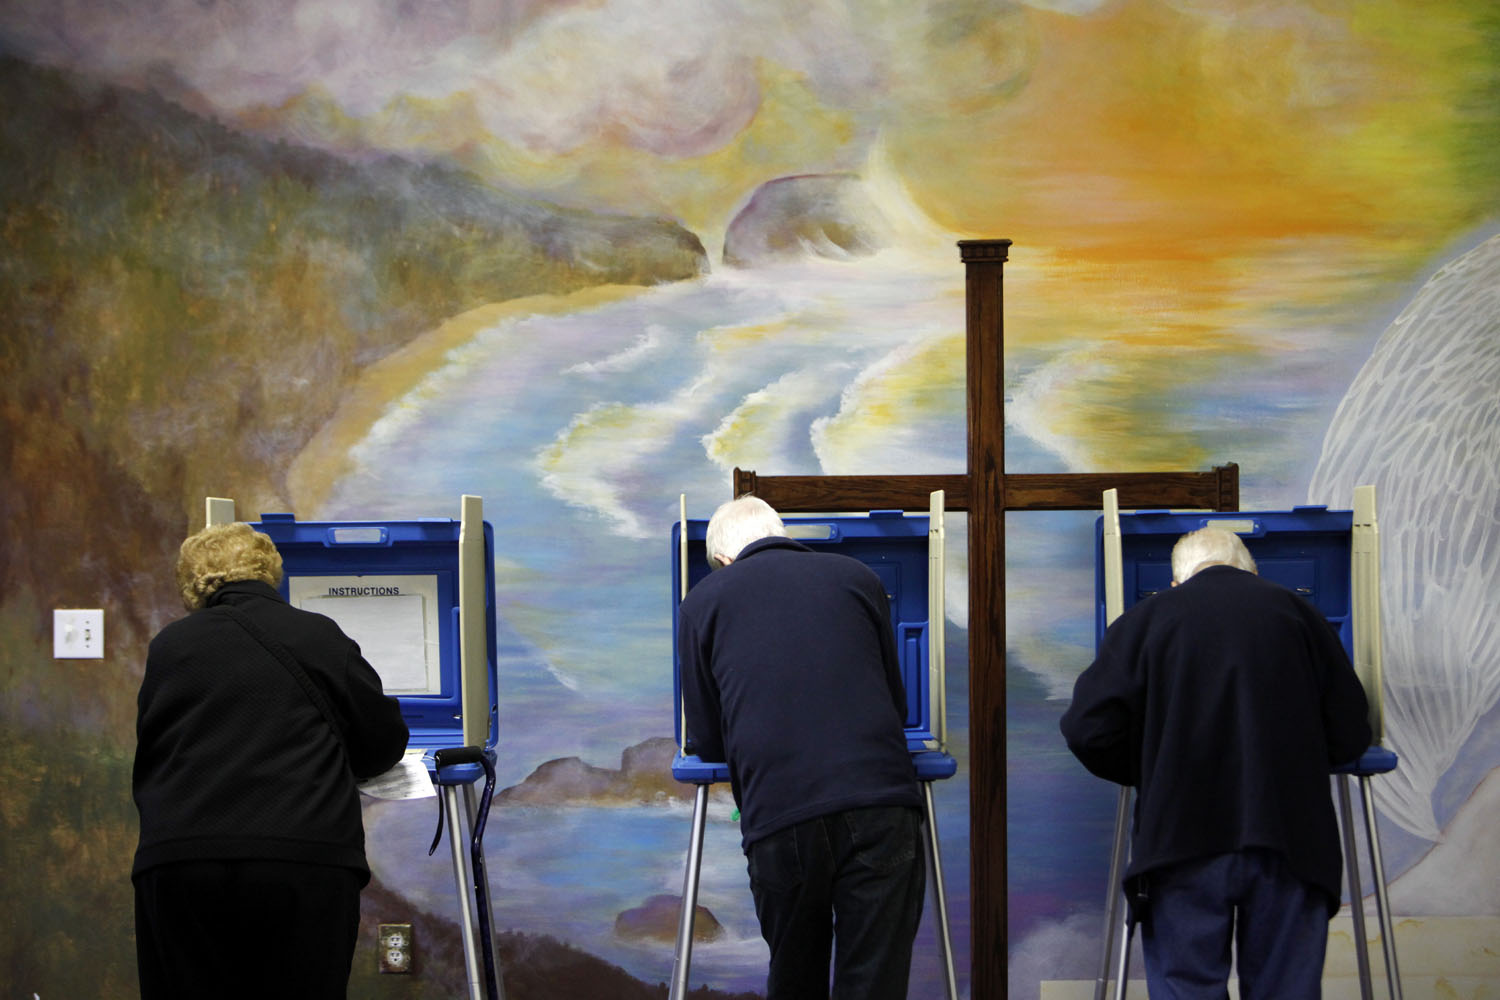 Image: Nov. 6, 2012. Voters cast ballots at the Fellowship of Christ church in Cary, N.C. on Election Day.